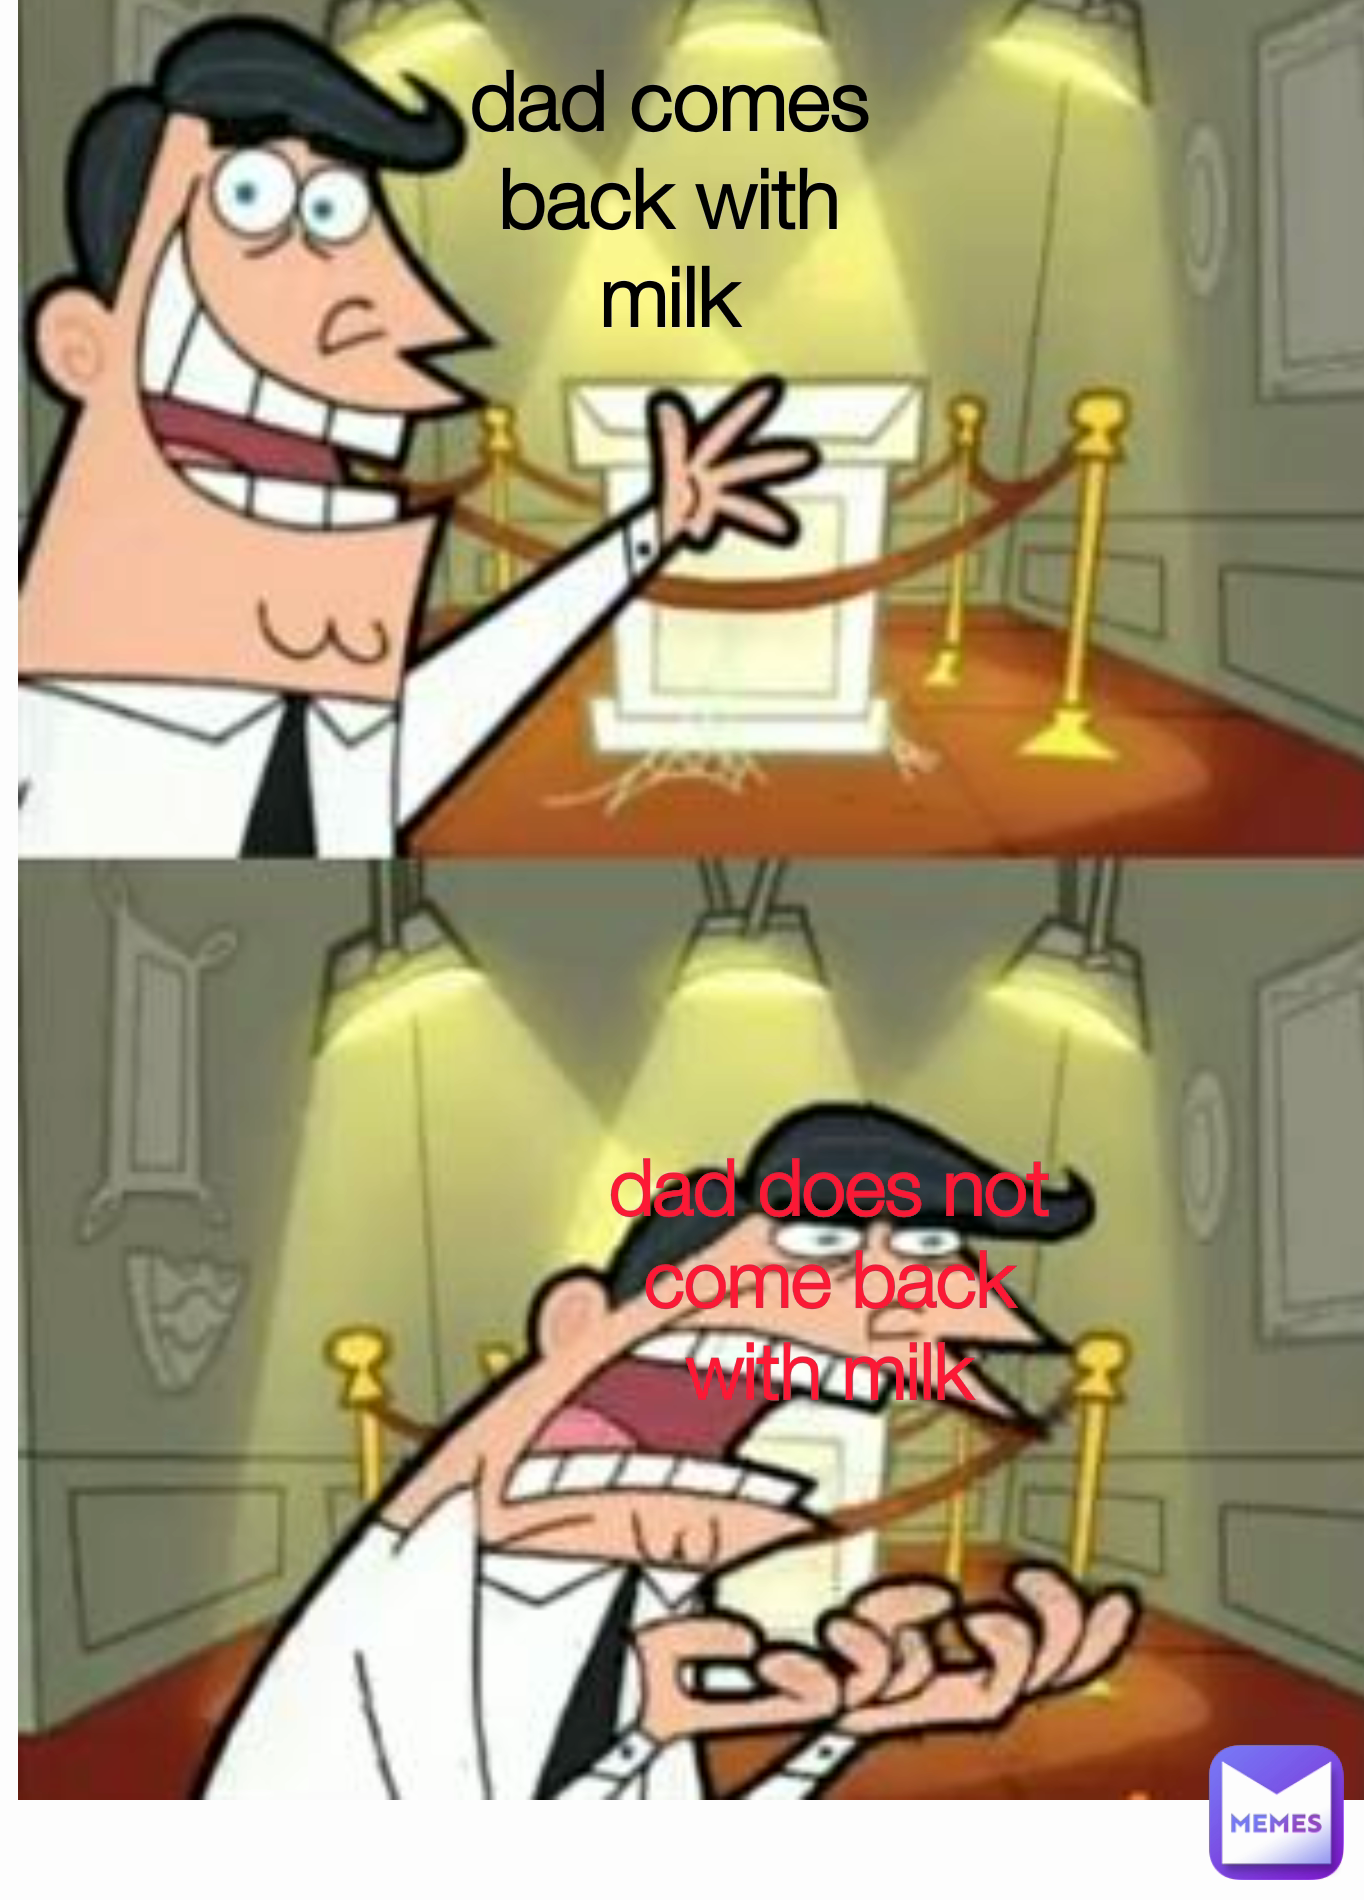 dad does not come back with milk
 dad comes back with milk
